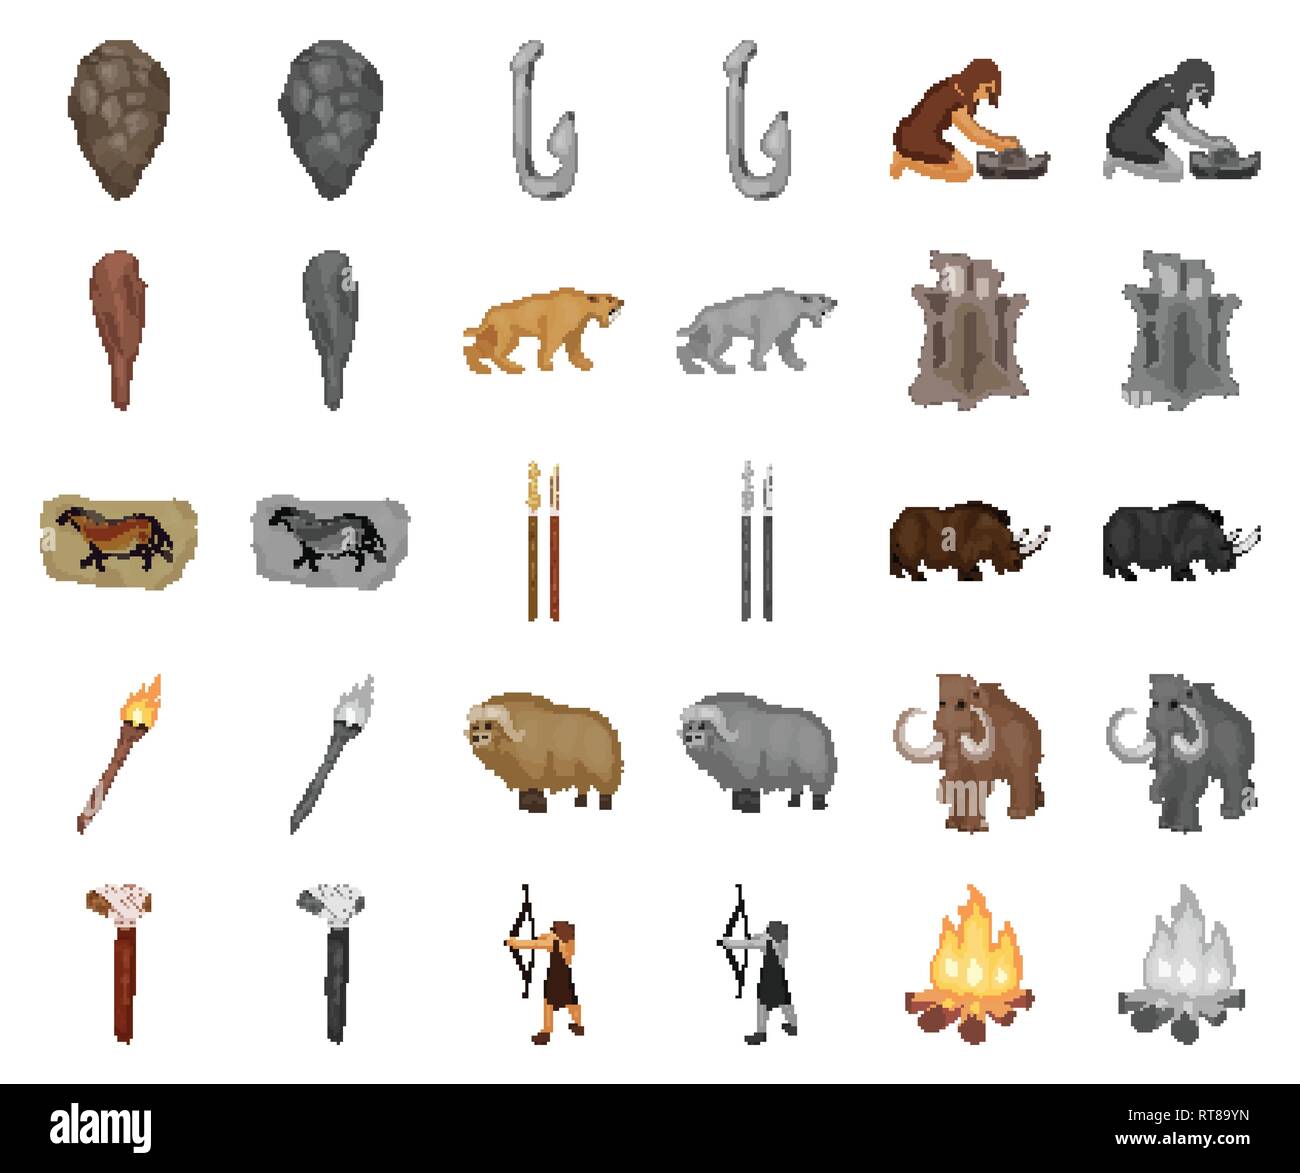 age,ancient,animal,antiquity,arrow,axe,beginning,bone,bow,campfire,cartoon,monochrom,caveman,cavewoman,collection,culture,design,development,epoch,fauna,fish,grindstone,hide,hook,humanity,icon,illustration,isolated,life,logo,man,muskox,painting,people,period,rhinoceros,saber-toothed,set,sign,spears,stone,survival,symbol,tiger,tool,torch,truncheon,vector,venus,web,woolly mammoth Vector Vectors , Stock Vector